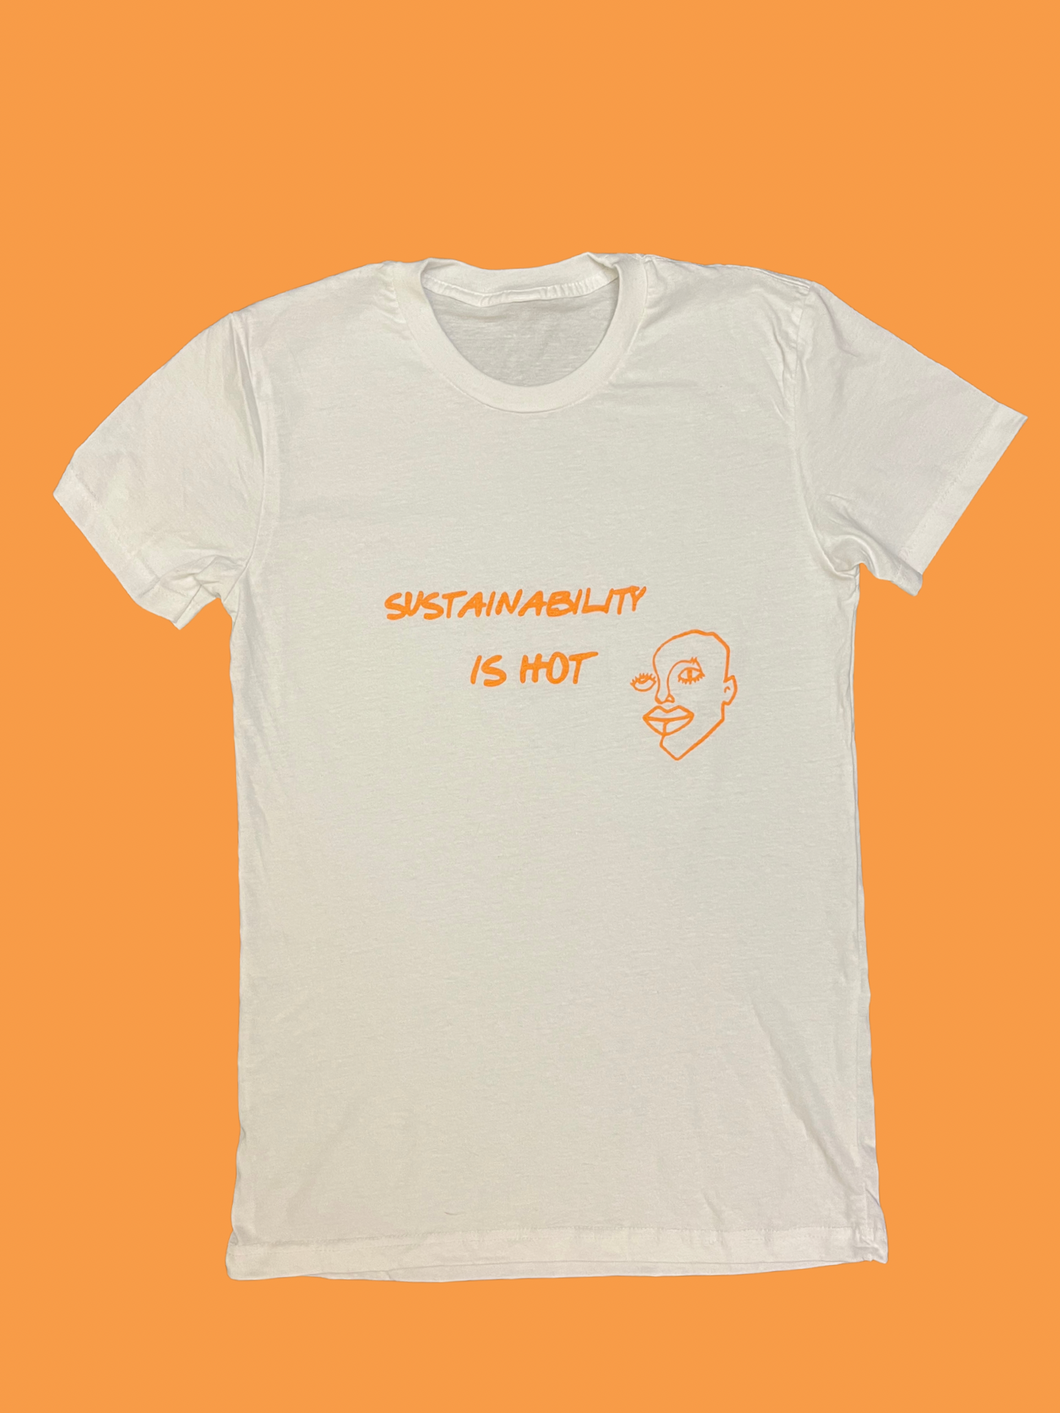 Sustainability is hot t-shirt